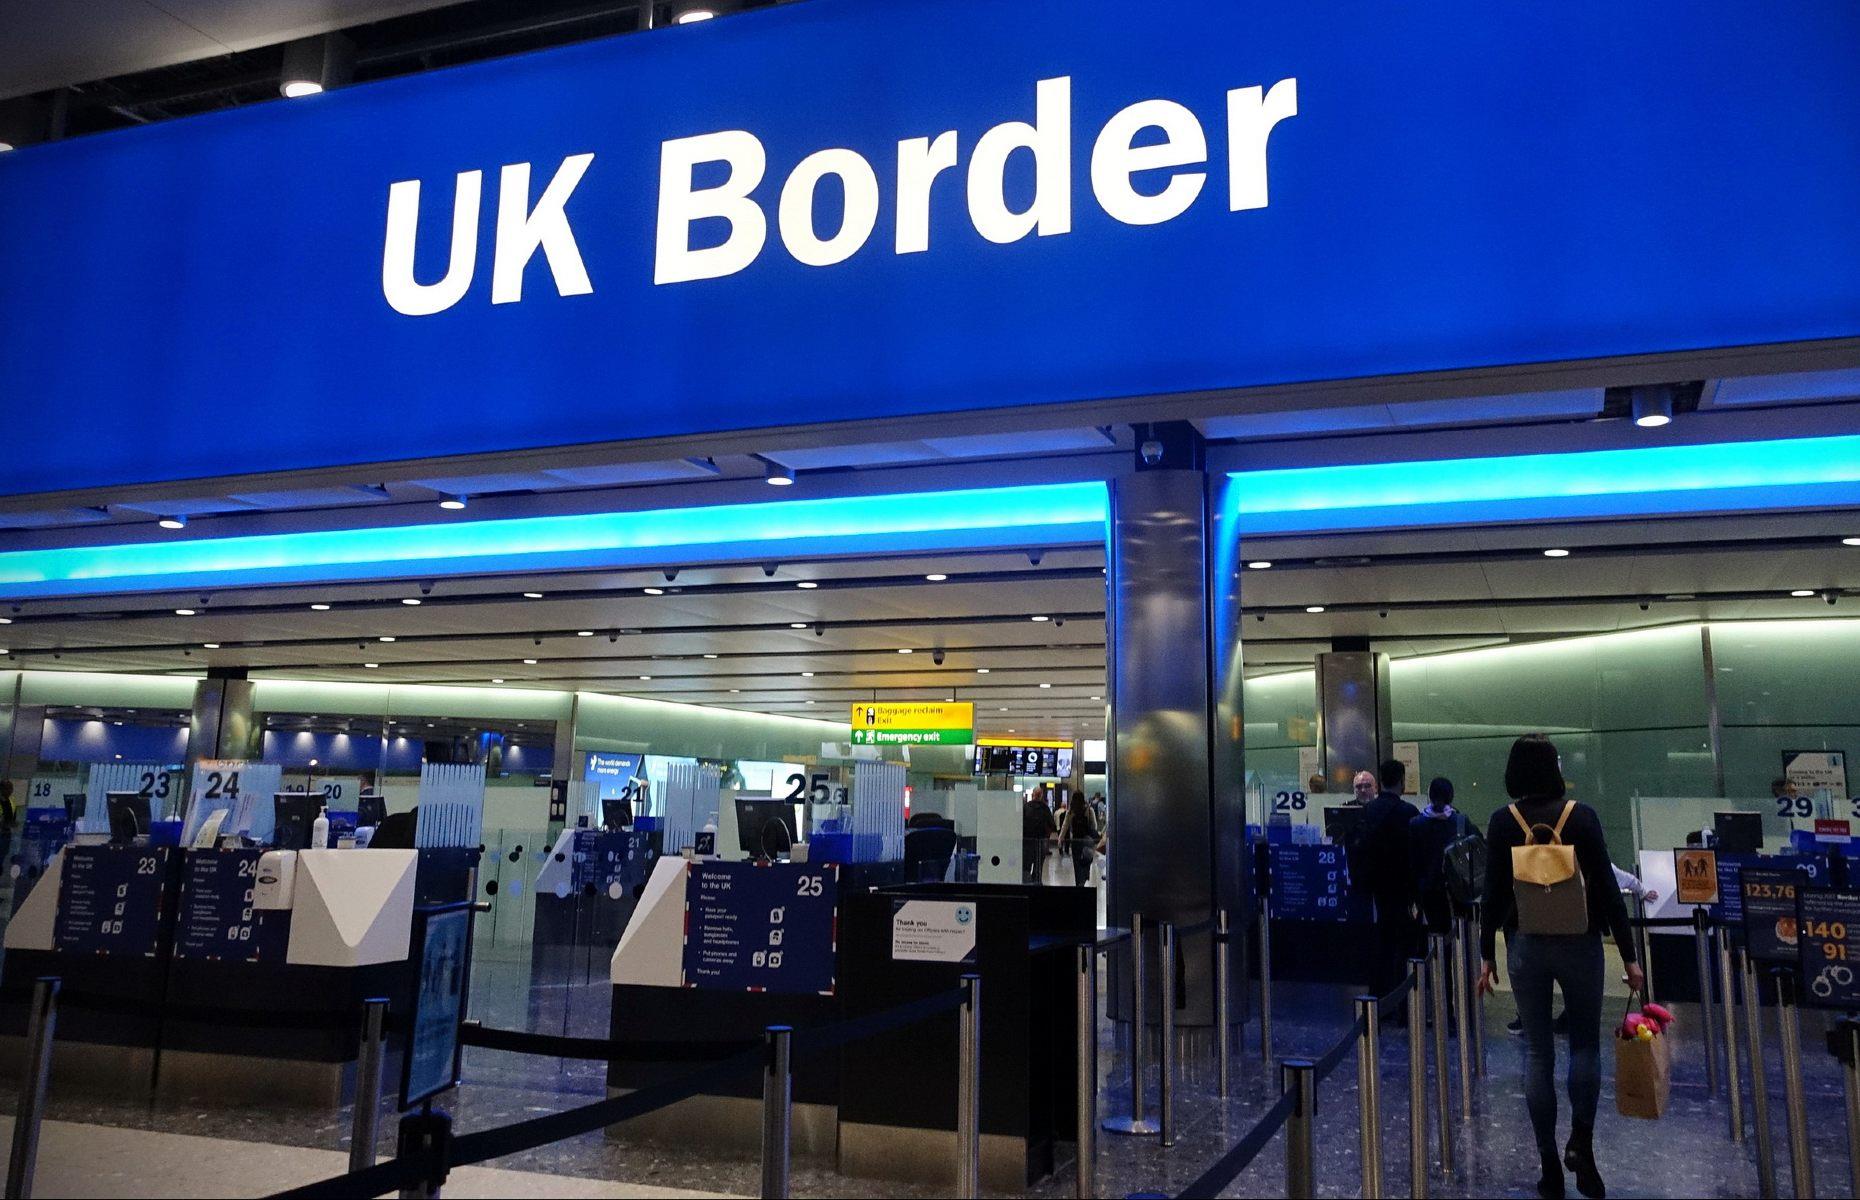 <p>As part of ongoing plans to digitize its borders, the UK is introducing a new Electronic Travel Authorisation (ETA) document that will be required for visa-free international visitors to England, Scotland, Wales, and Northern Ireland. ETAs cost £10 ($13) and are already mandatory for Qatari passport holders, with Bahrain, Jordan, Kuwait, Oman, Saudi Arabia, and the UAE joining the scheme from February 2024.</p>  <p>More countries, including the 27 European Union member states, the USA, Canada, and Australia, are set to join later in 2024. More on the ETA process can be found in our <a href="https://www.loveexploring.com/news/190526/the-ultimate-guide-to-the-new-electronic-travel-authorisation-system">detailed explainer</a>.</p>